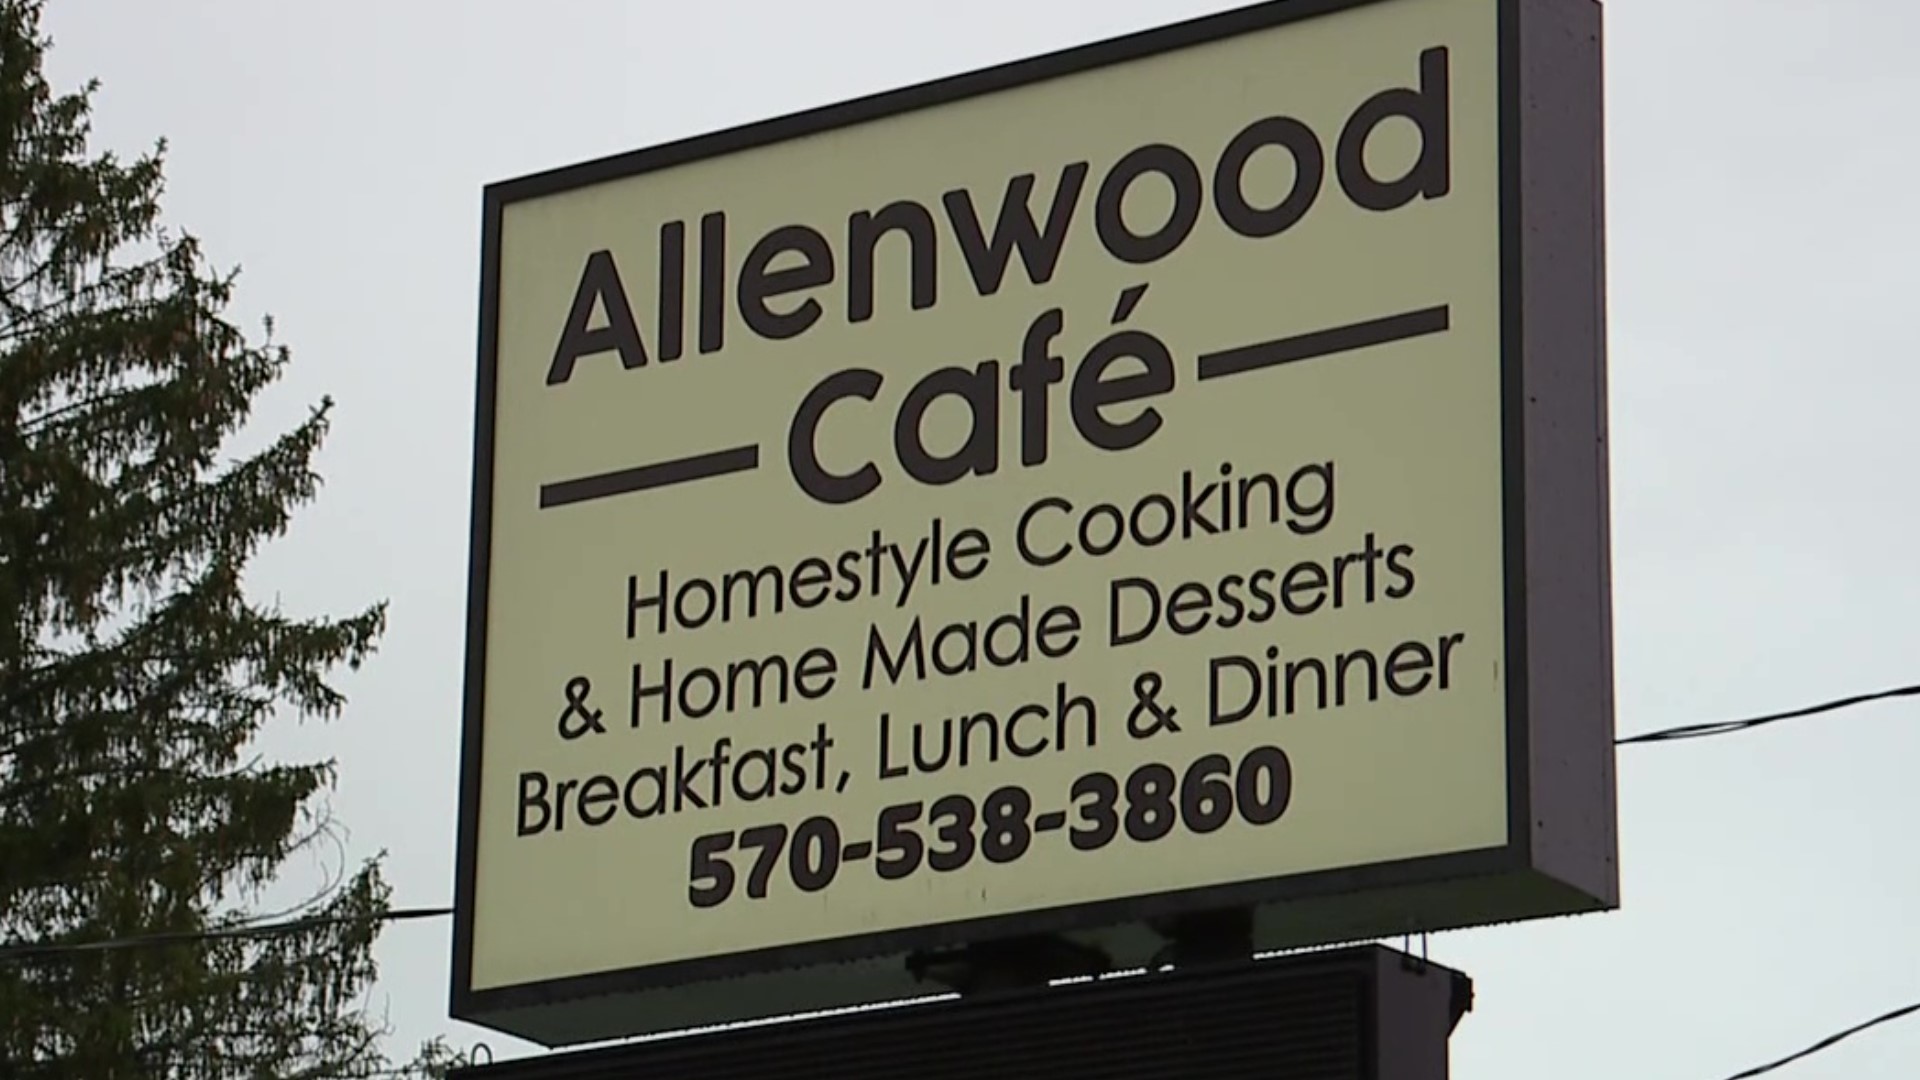 The Allenwood Cafe closed about two years ago during the COVID-19 pandemic. But a new owner brought the place back, and customers couldn't be happier.